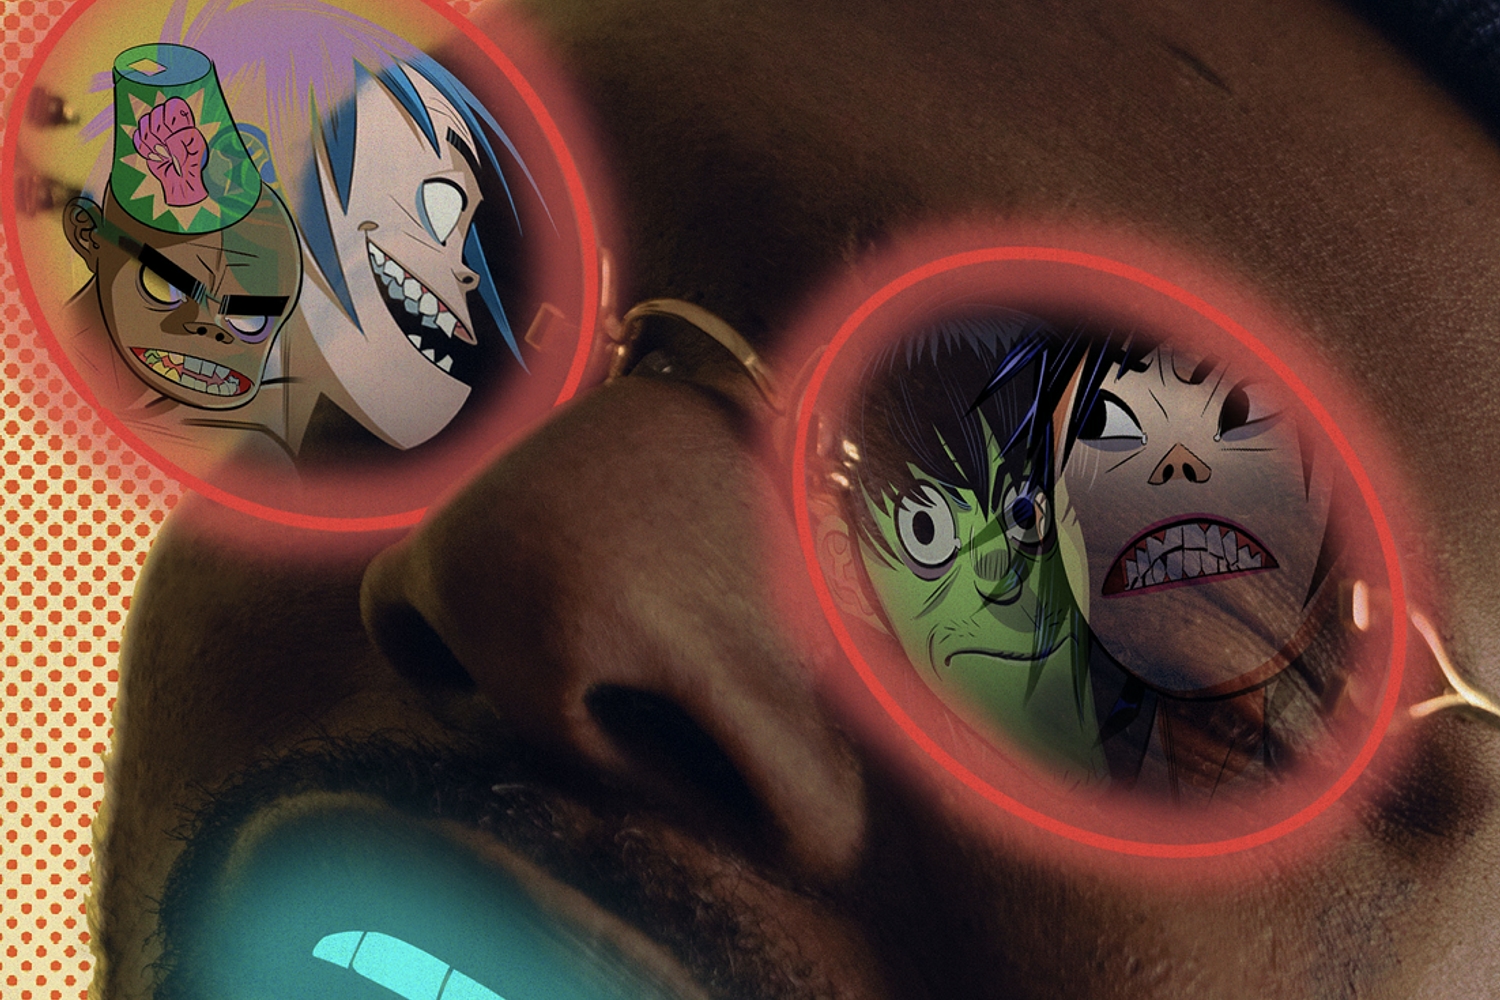 Gorillaz link up with ScHoolboy Q for 'PAC-MAN'